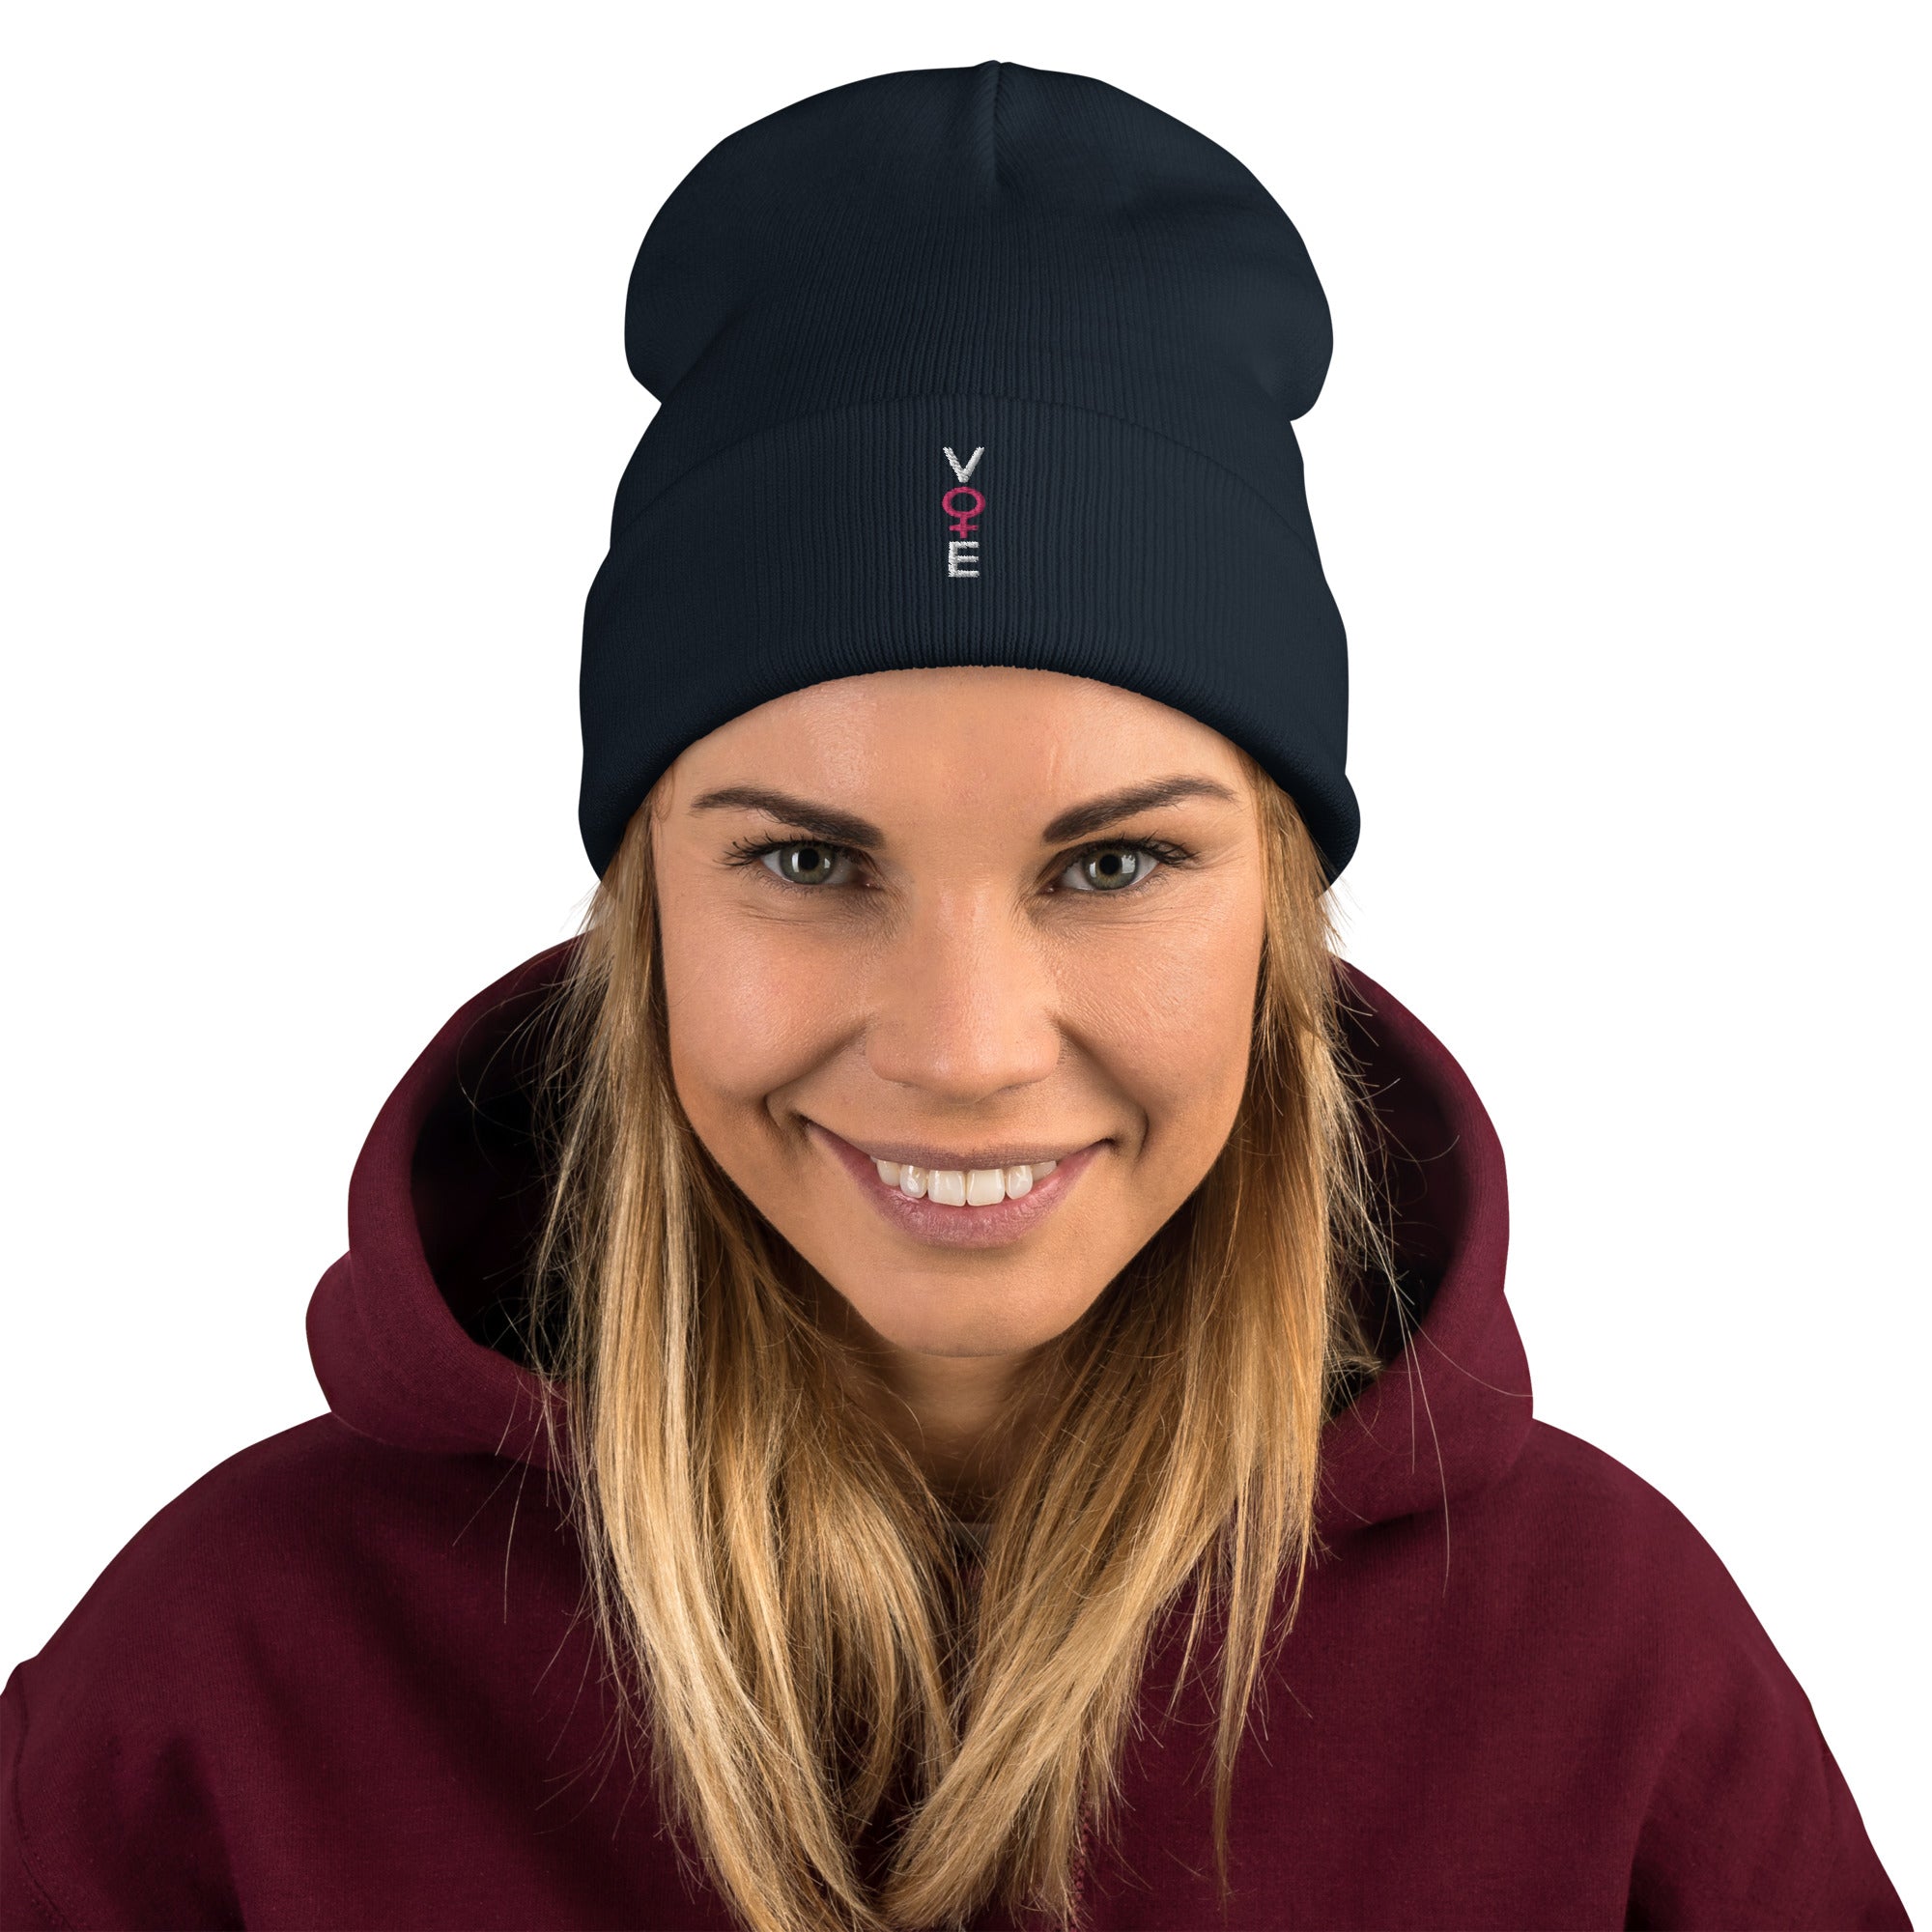 SHE VOTES- Embroidered Beanie